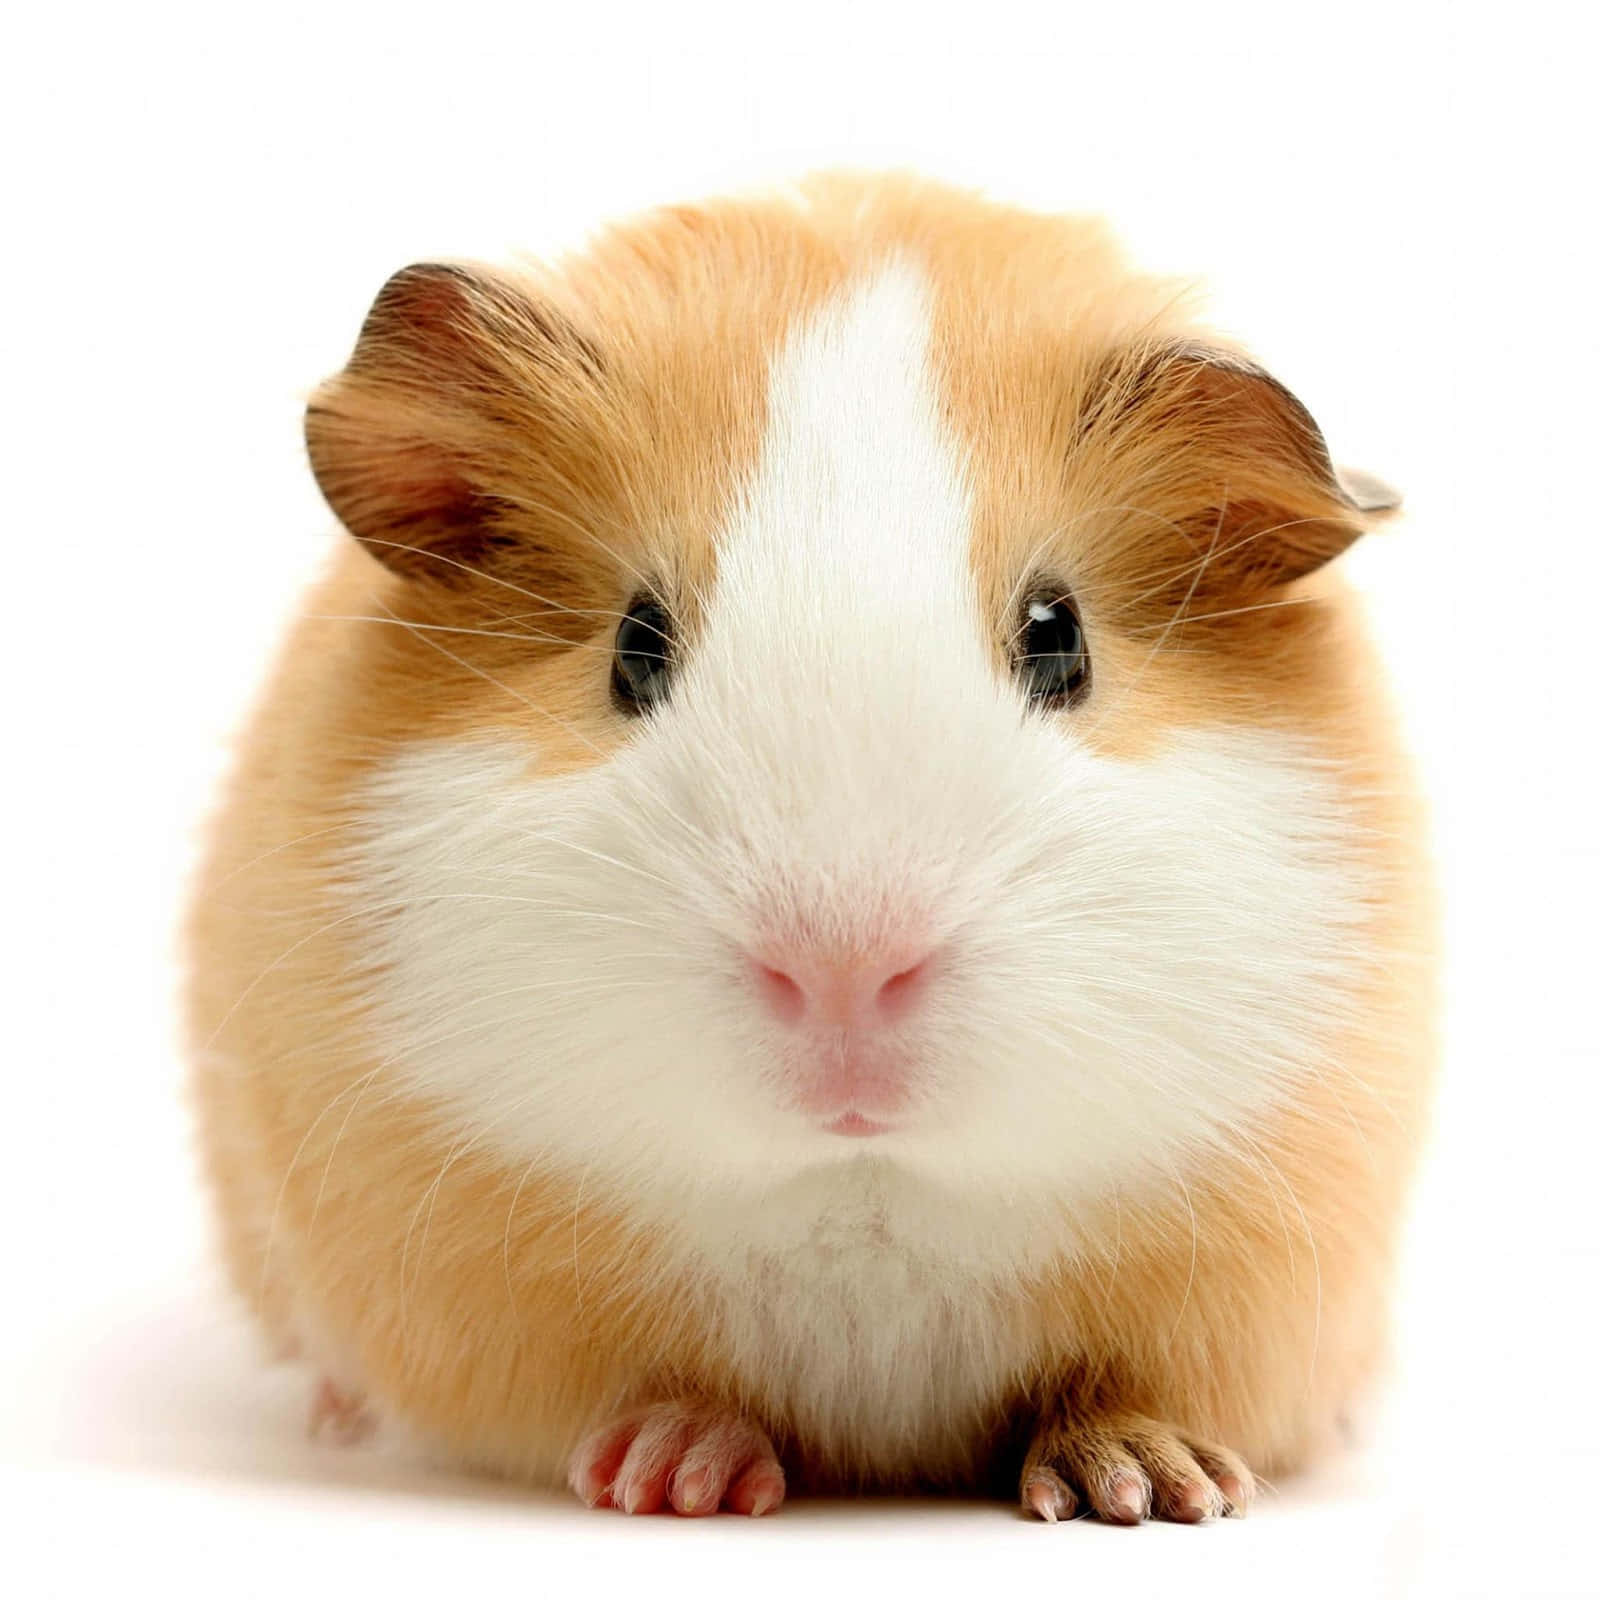 Adorable little guinea pig looking curious